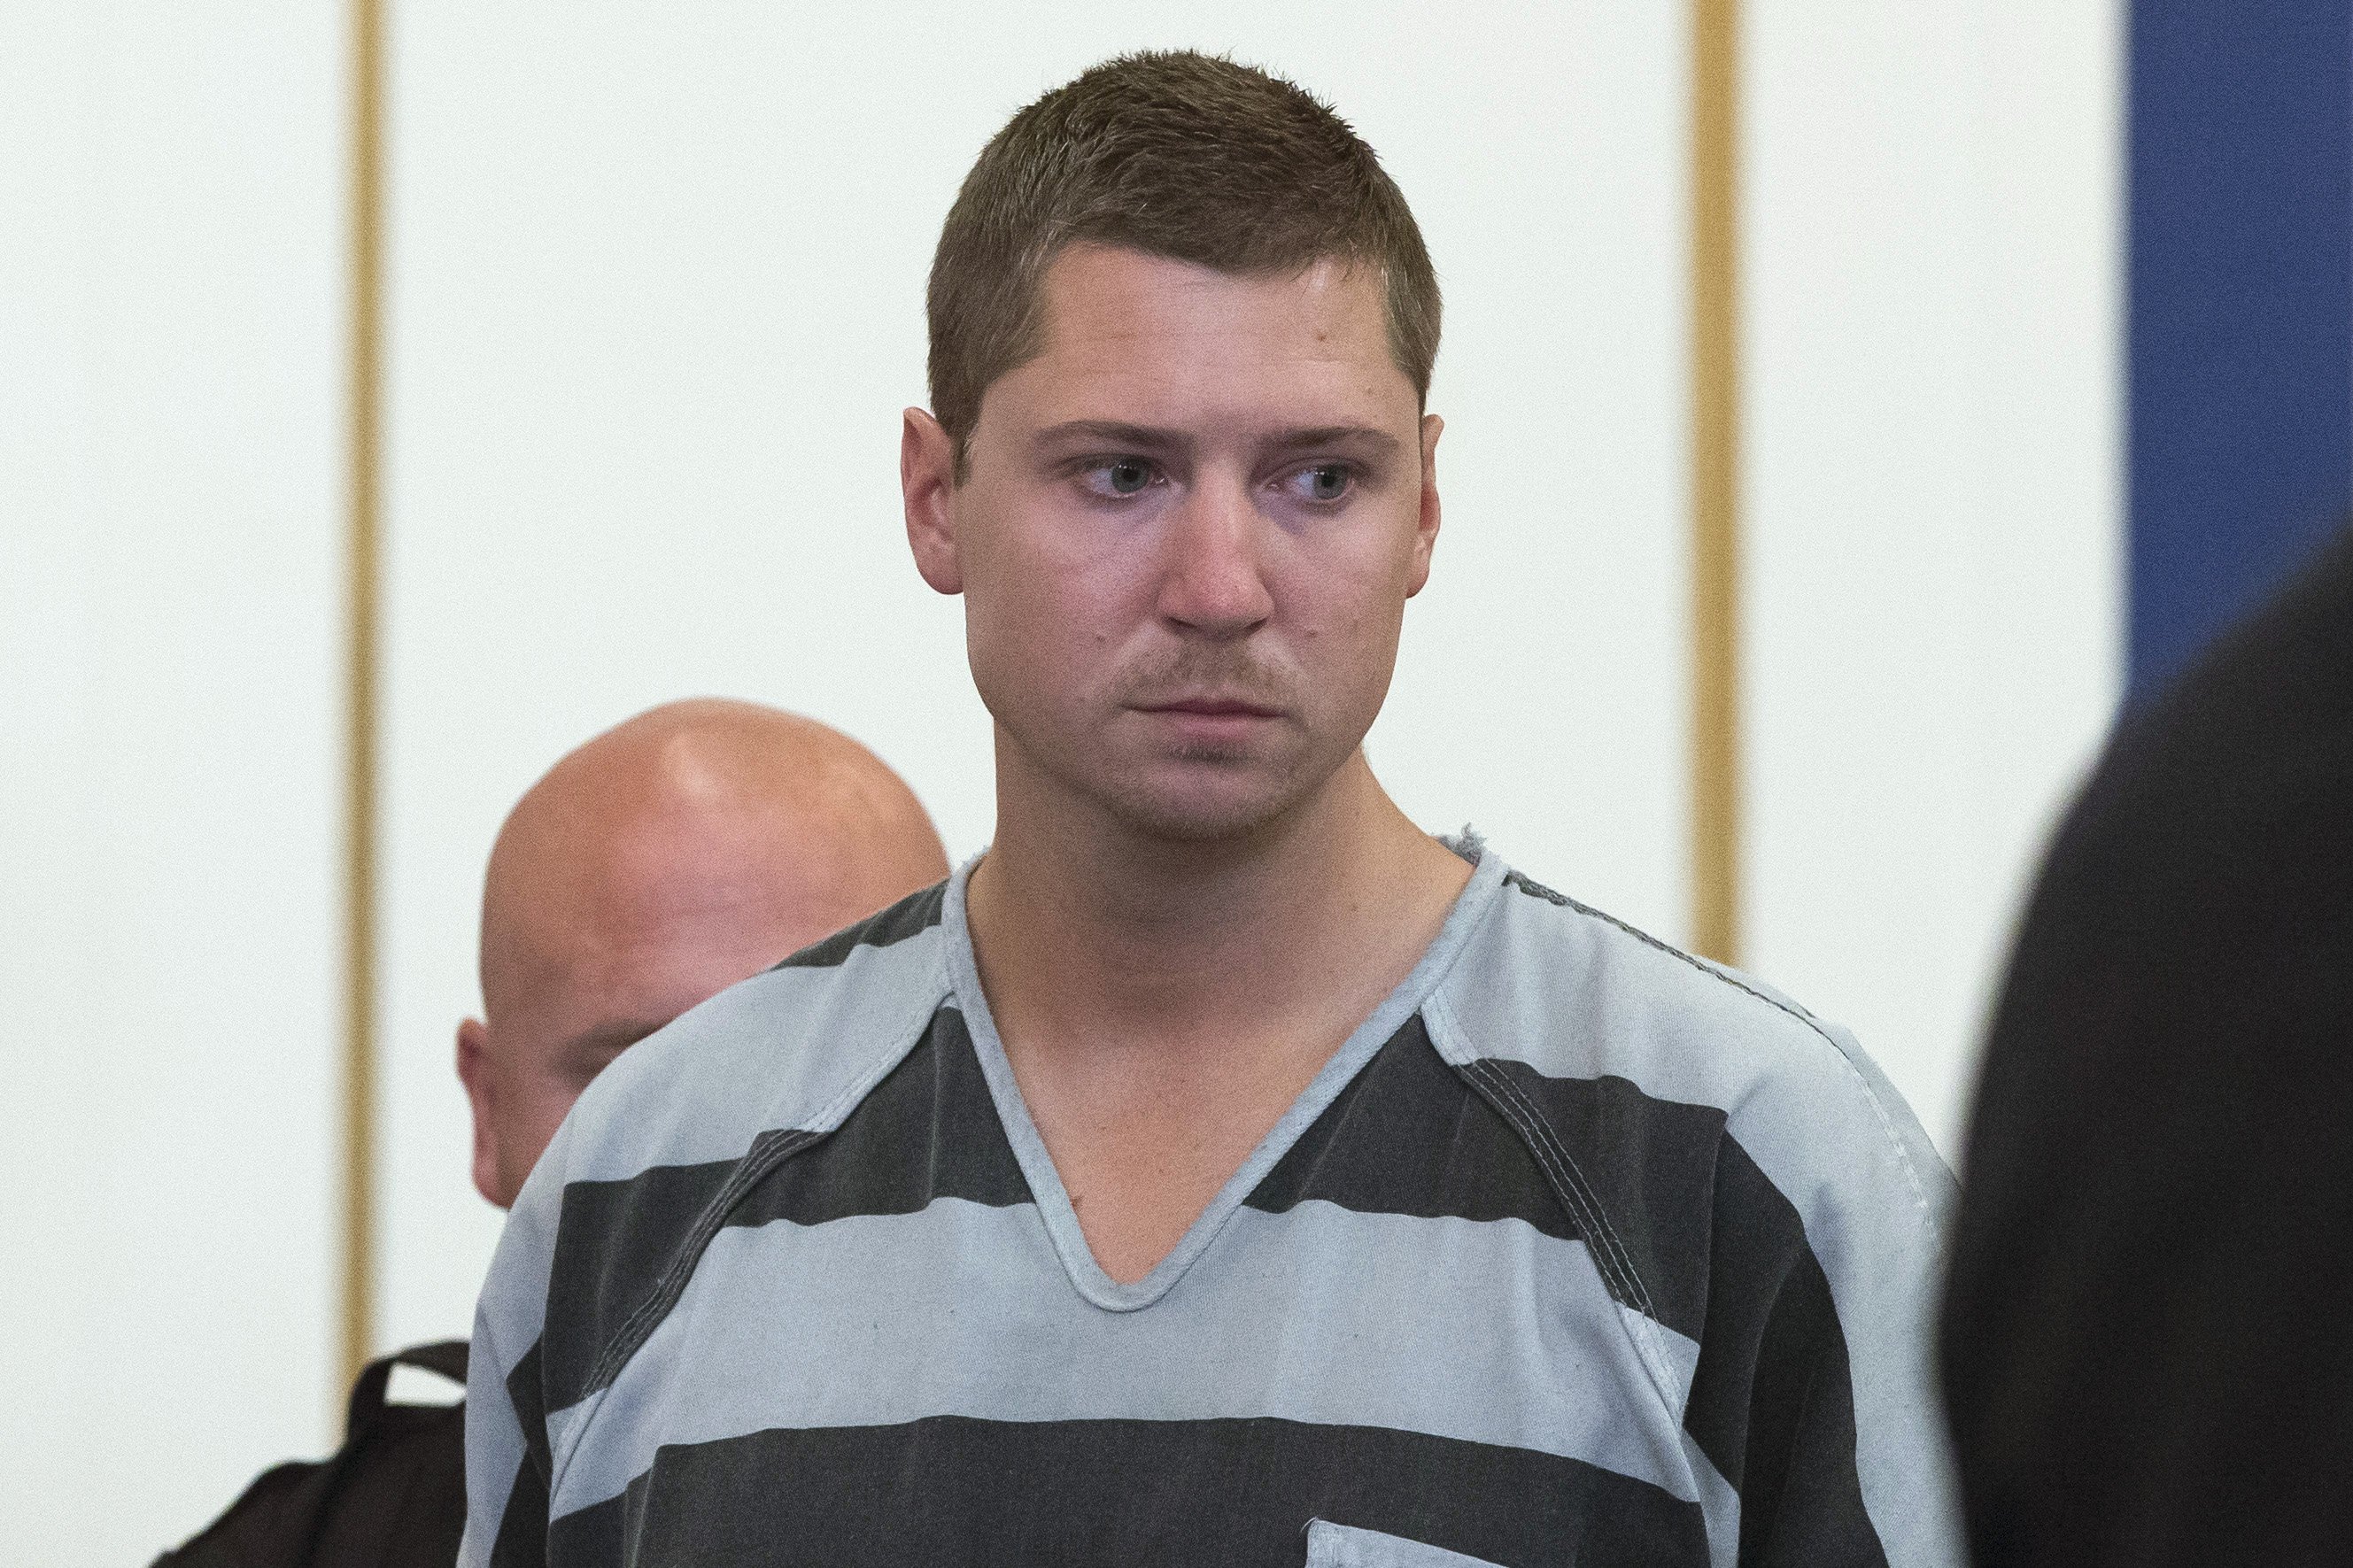 Former University of Cincinnati police officer Ray Tensing appears at Hamilton County Courthouse for his arraignment in the shooting death of motorist Samuel DuBose on July 30, 2015, in Cincinnati. (John Minchillo—AP)